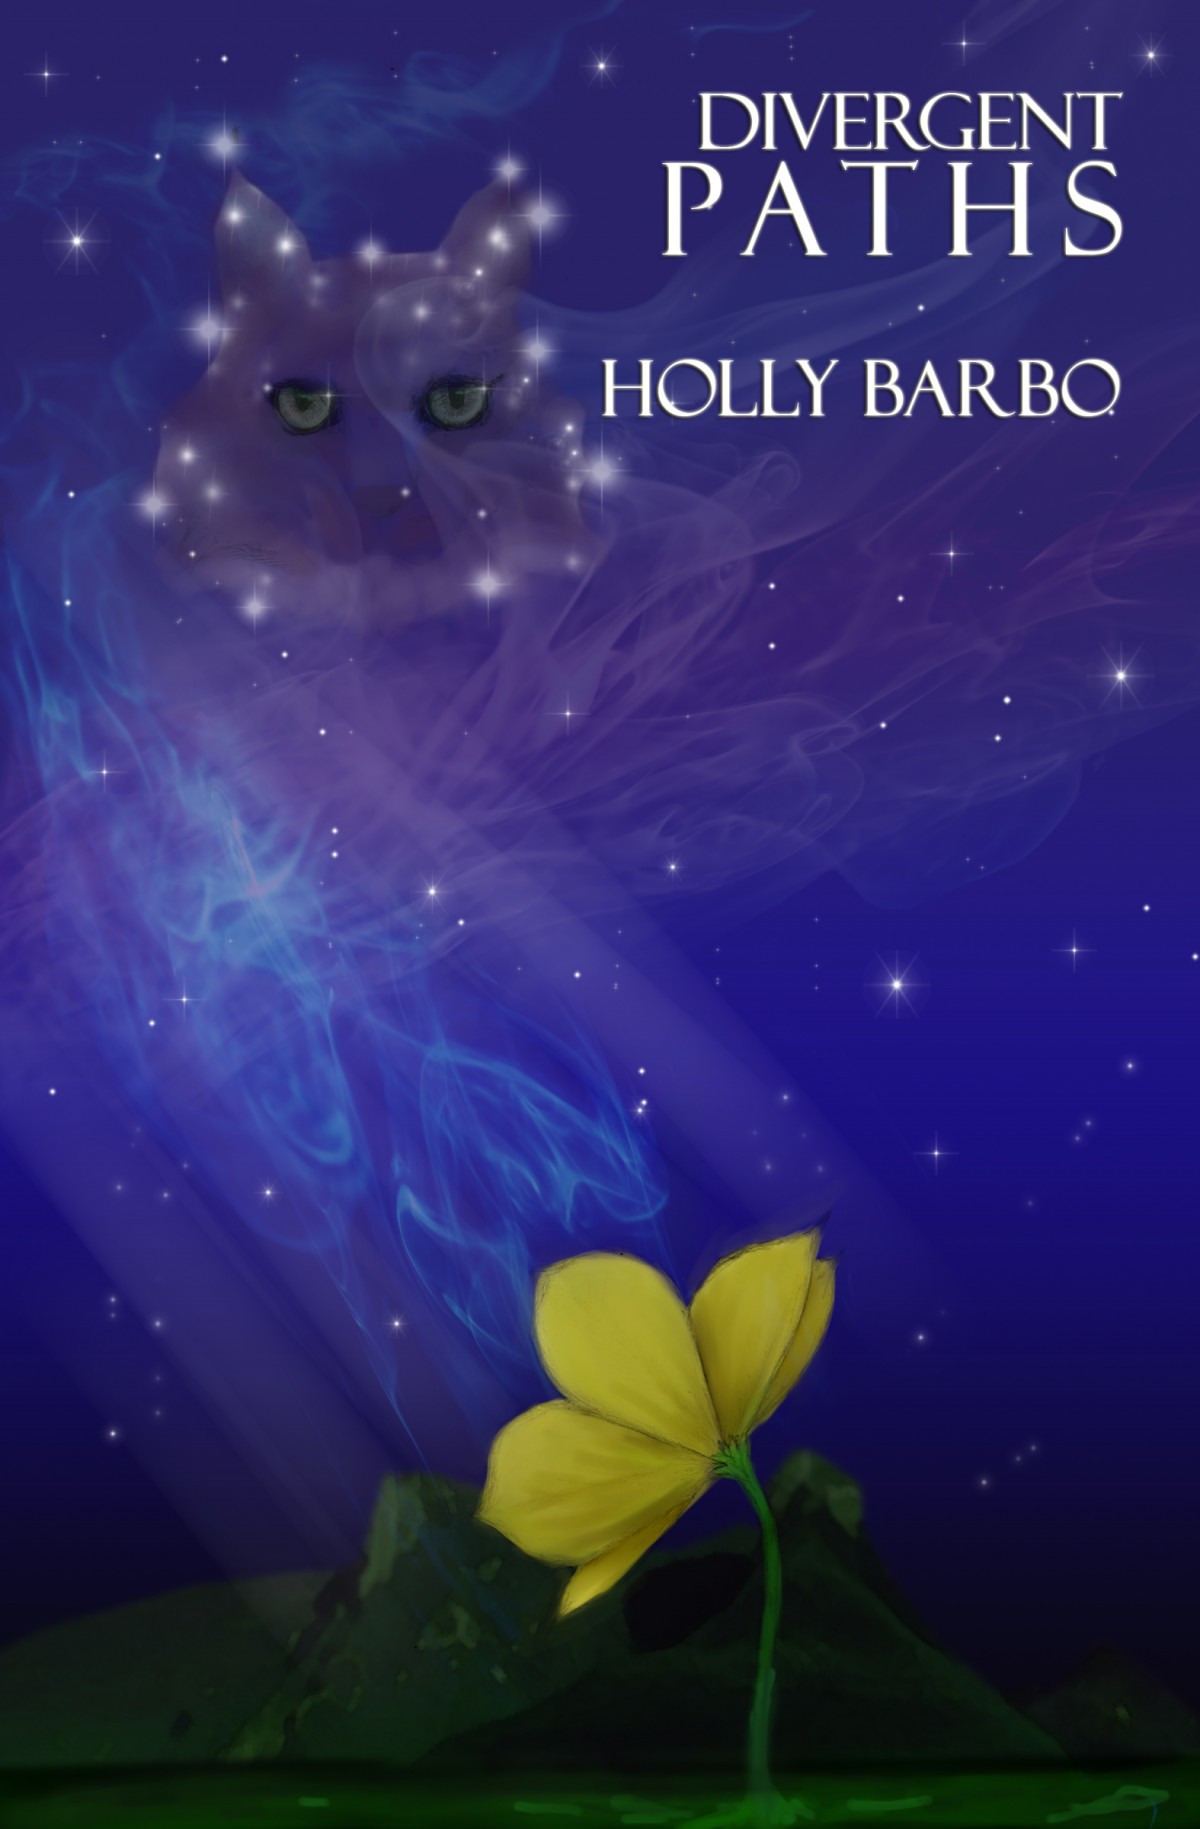 Divergent Paths by Holly Barbo